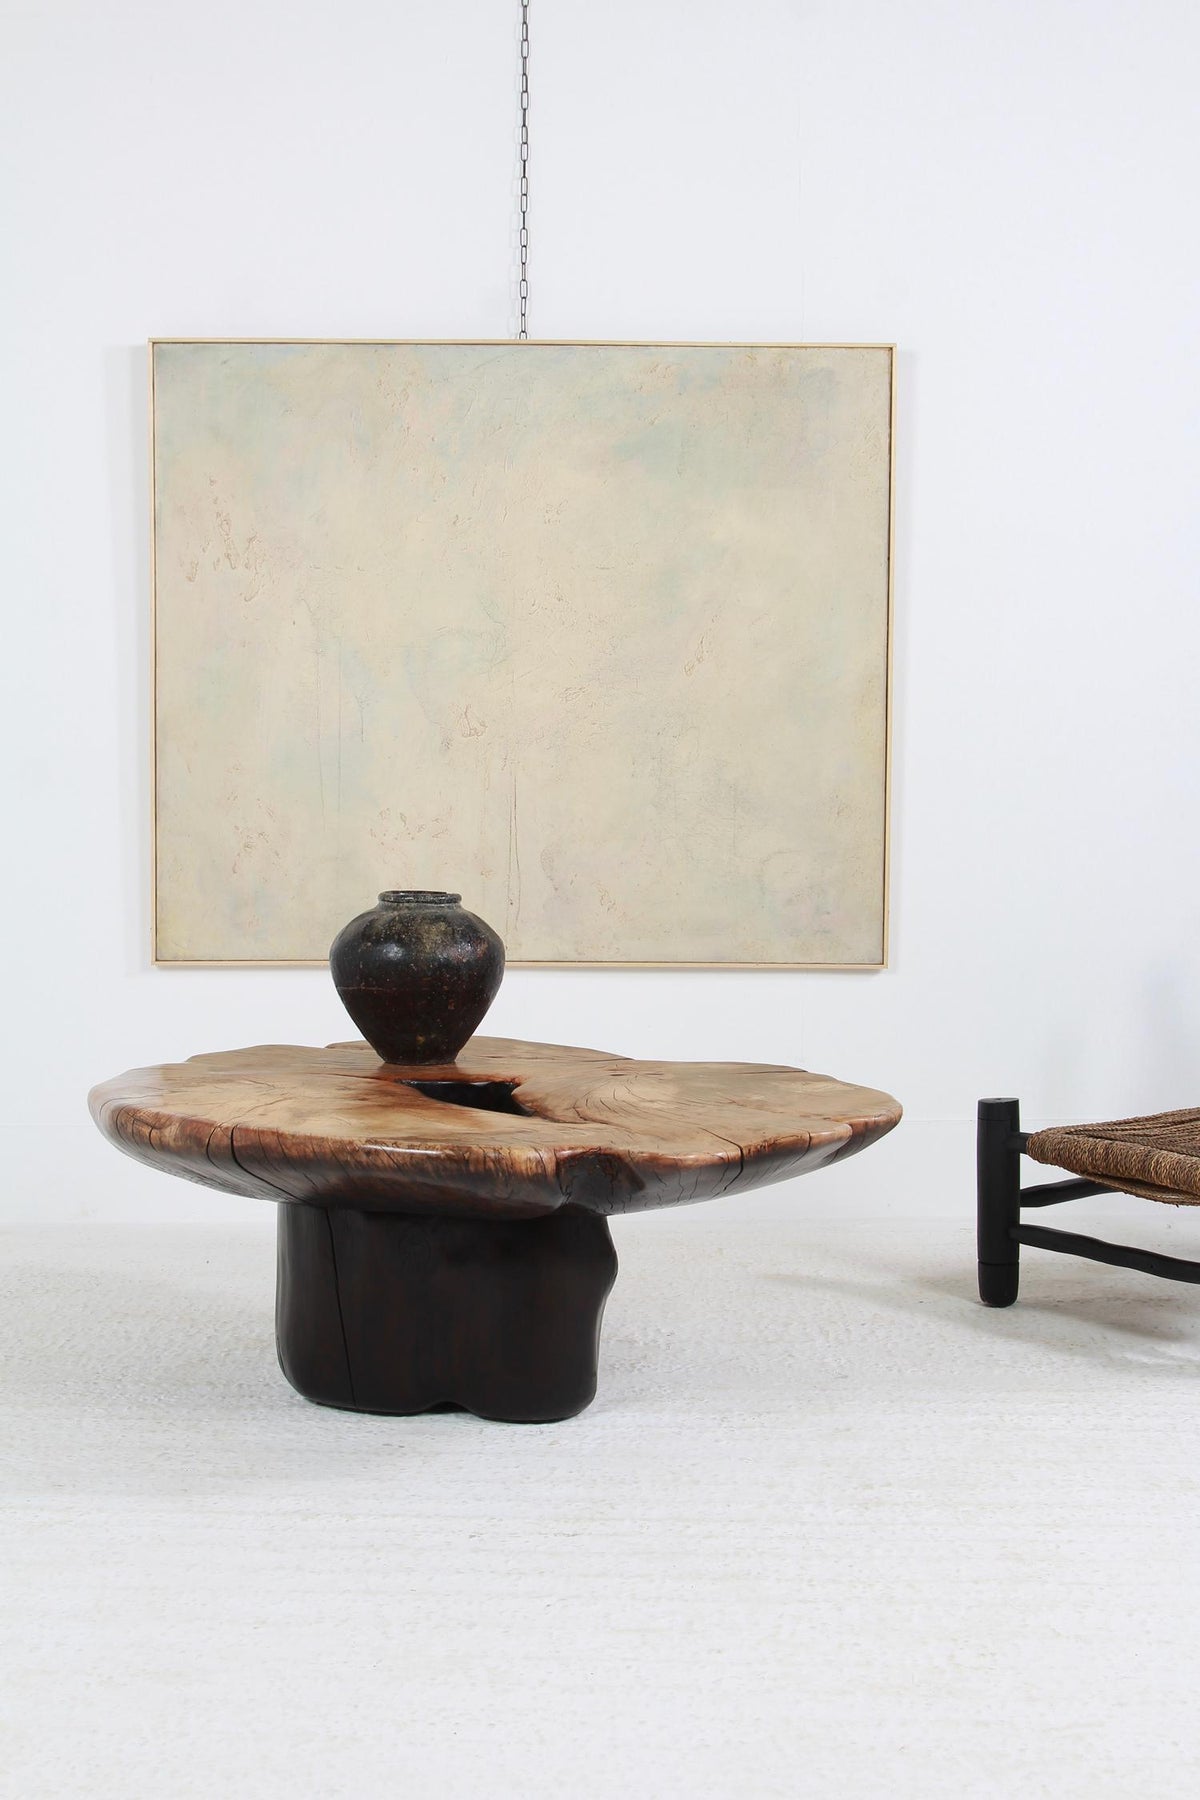 HUGE EXPRESSIVE SCULPTURAL CRAFTSMAN BEECH & CYPRESS PEBBLE COFFEE TABLE WITH BURNT WOOD BASE.PRICE ON REQUEST